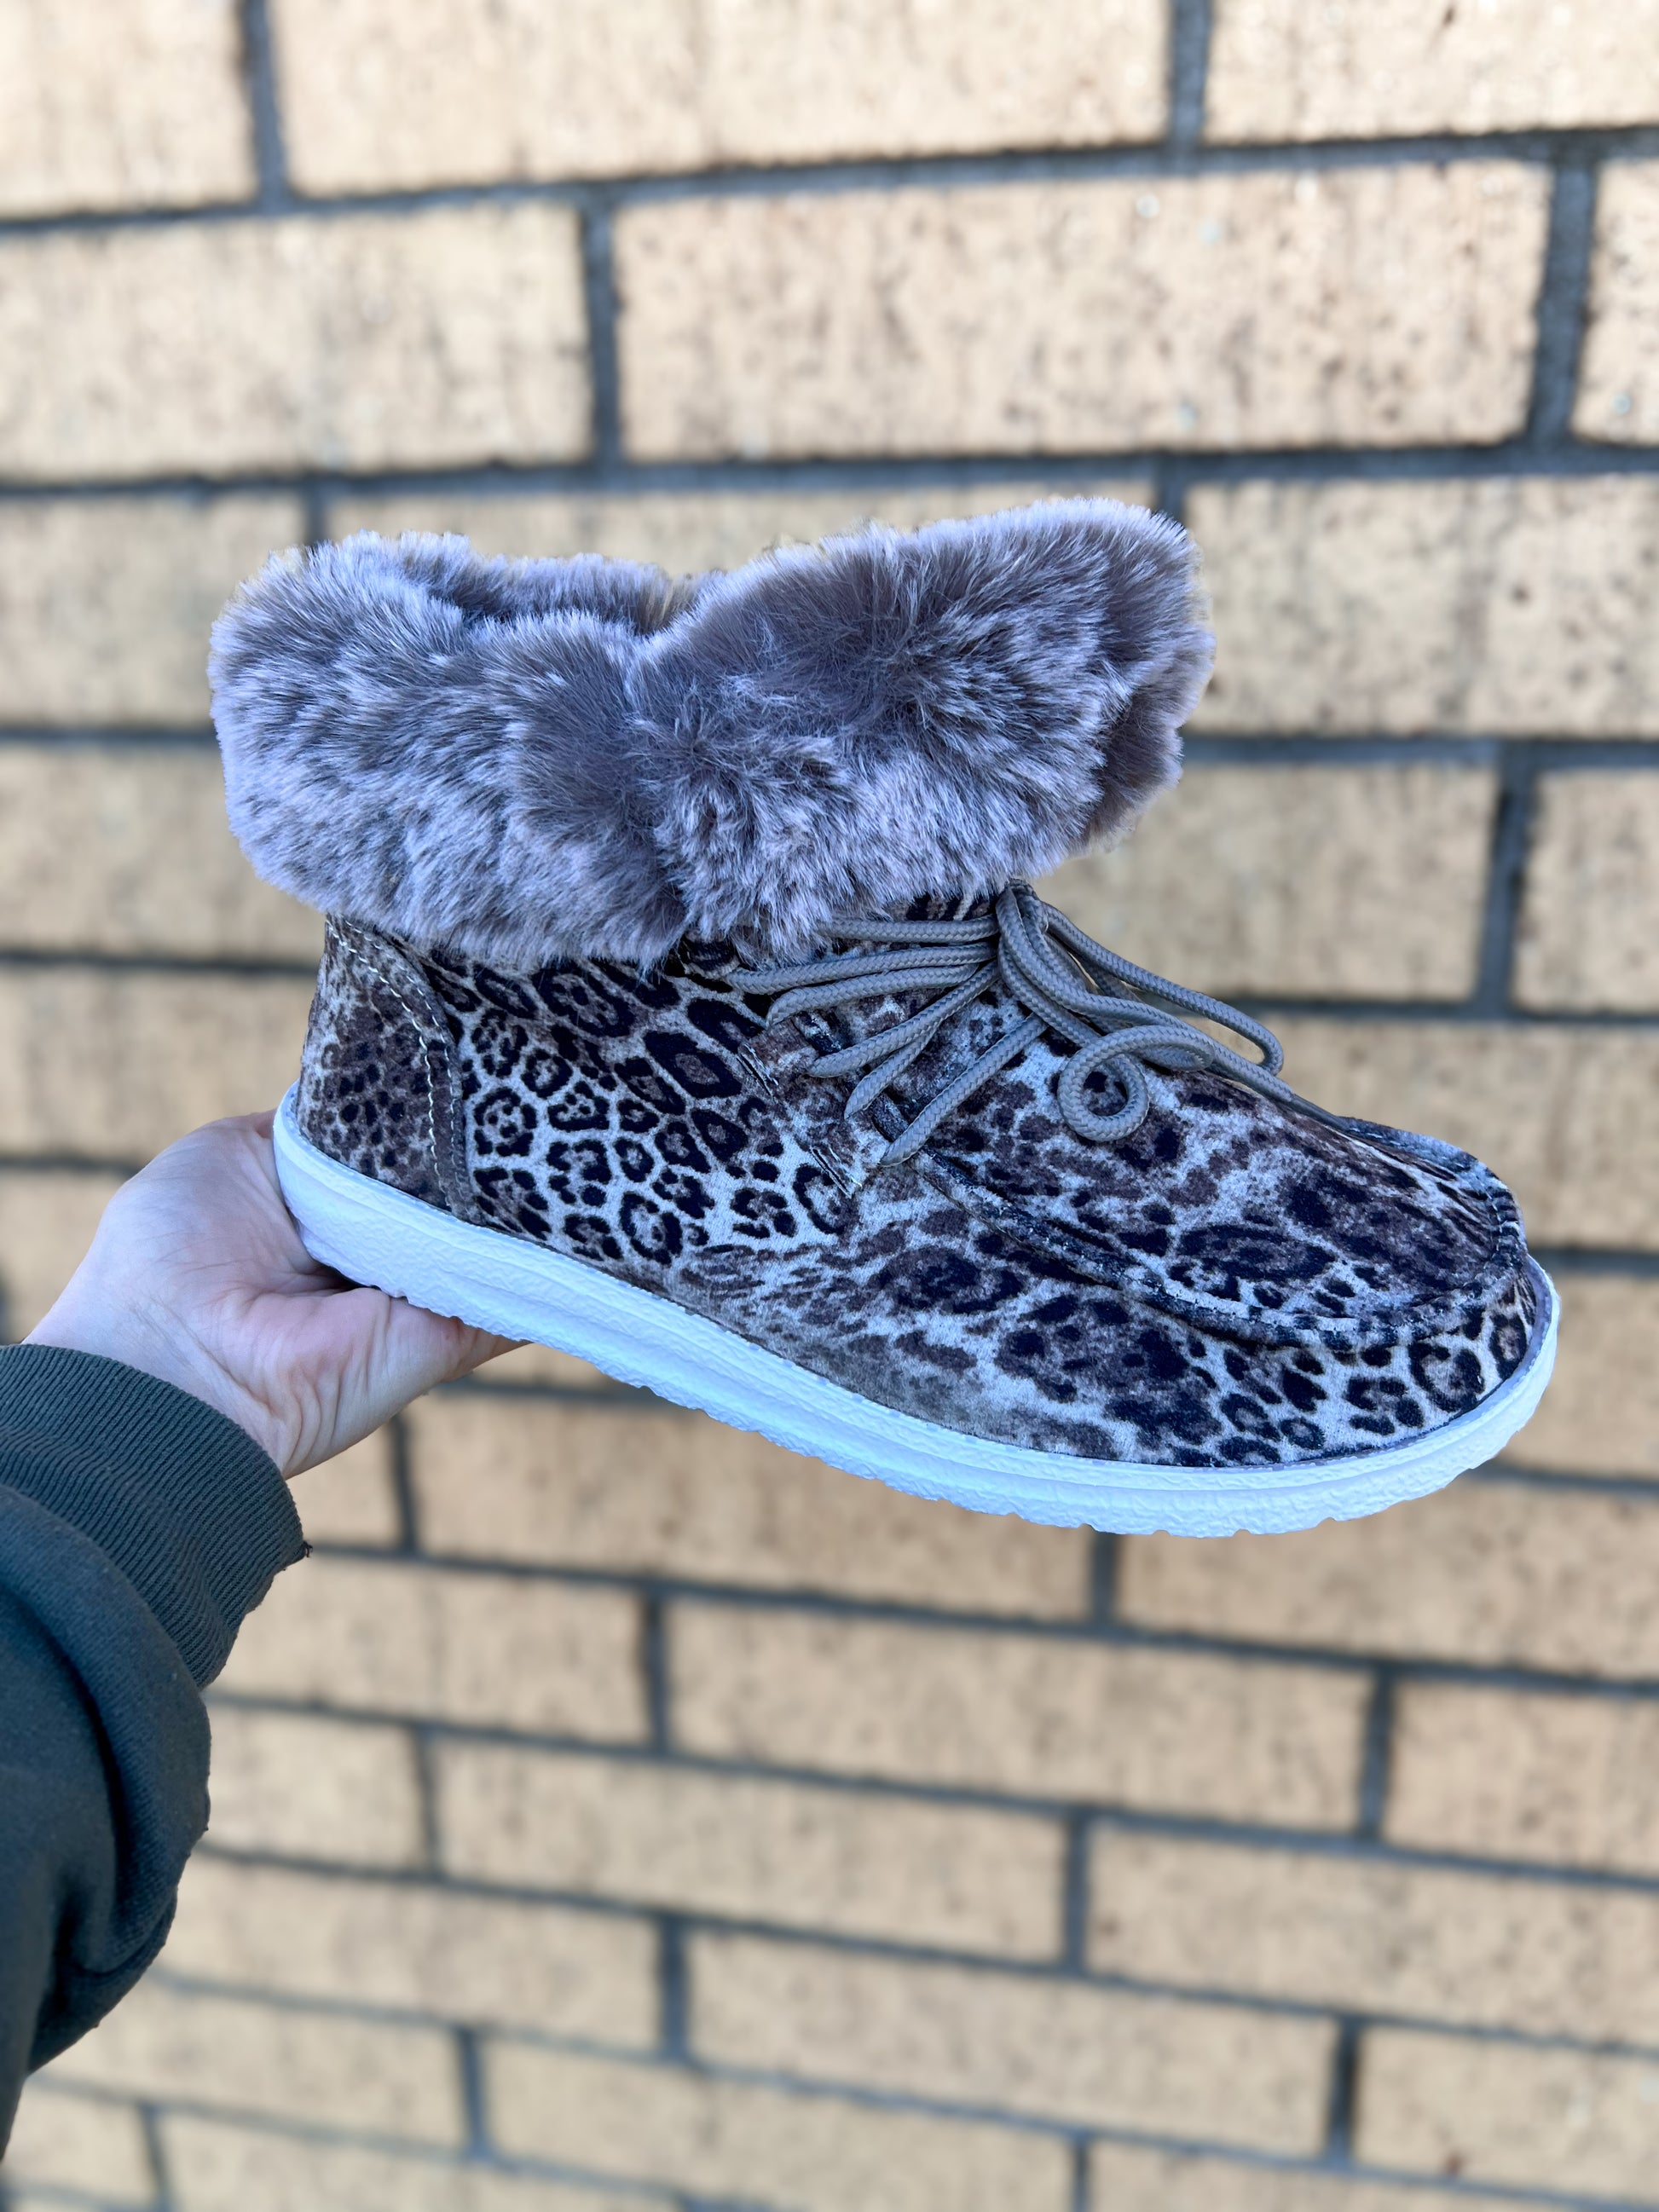 Fancy Black & White Leopard Faux Fur Lined High Top Shoes Gypsy Jazz-Shoes-GYPSY JAZZ/VERY G/WOLF BRANDS-05/15/24, 1st md, GJSP0236, Max Retail-The Twisted Chandelier